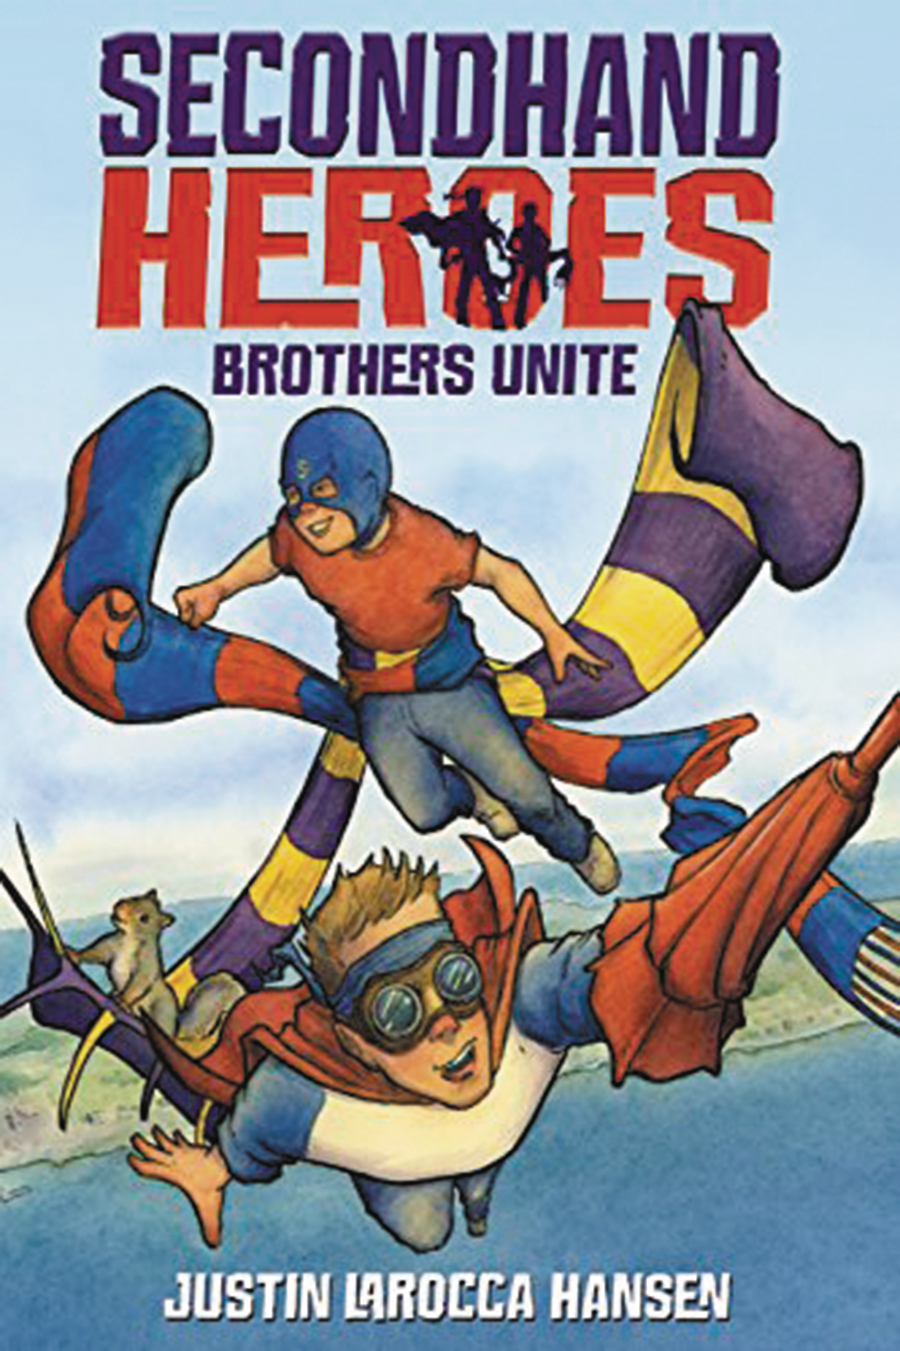 SECONDHAND HEROES GN VOL 01 BROTHERS UNITE